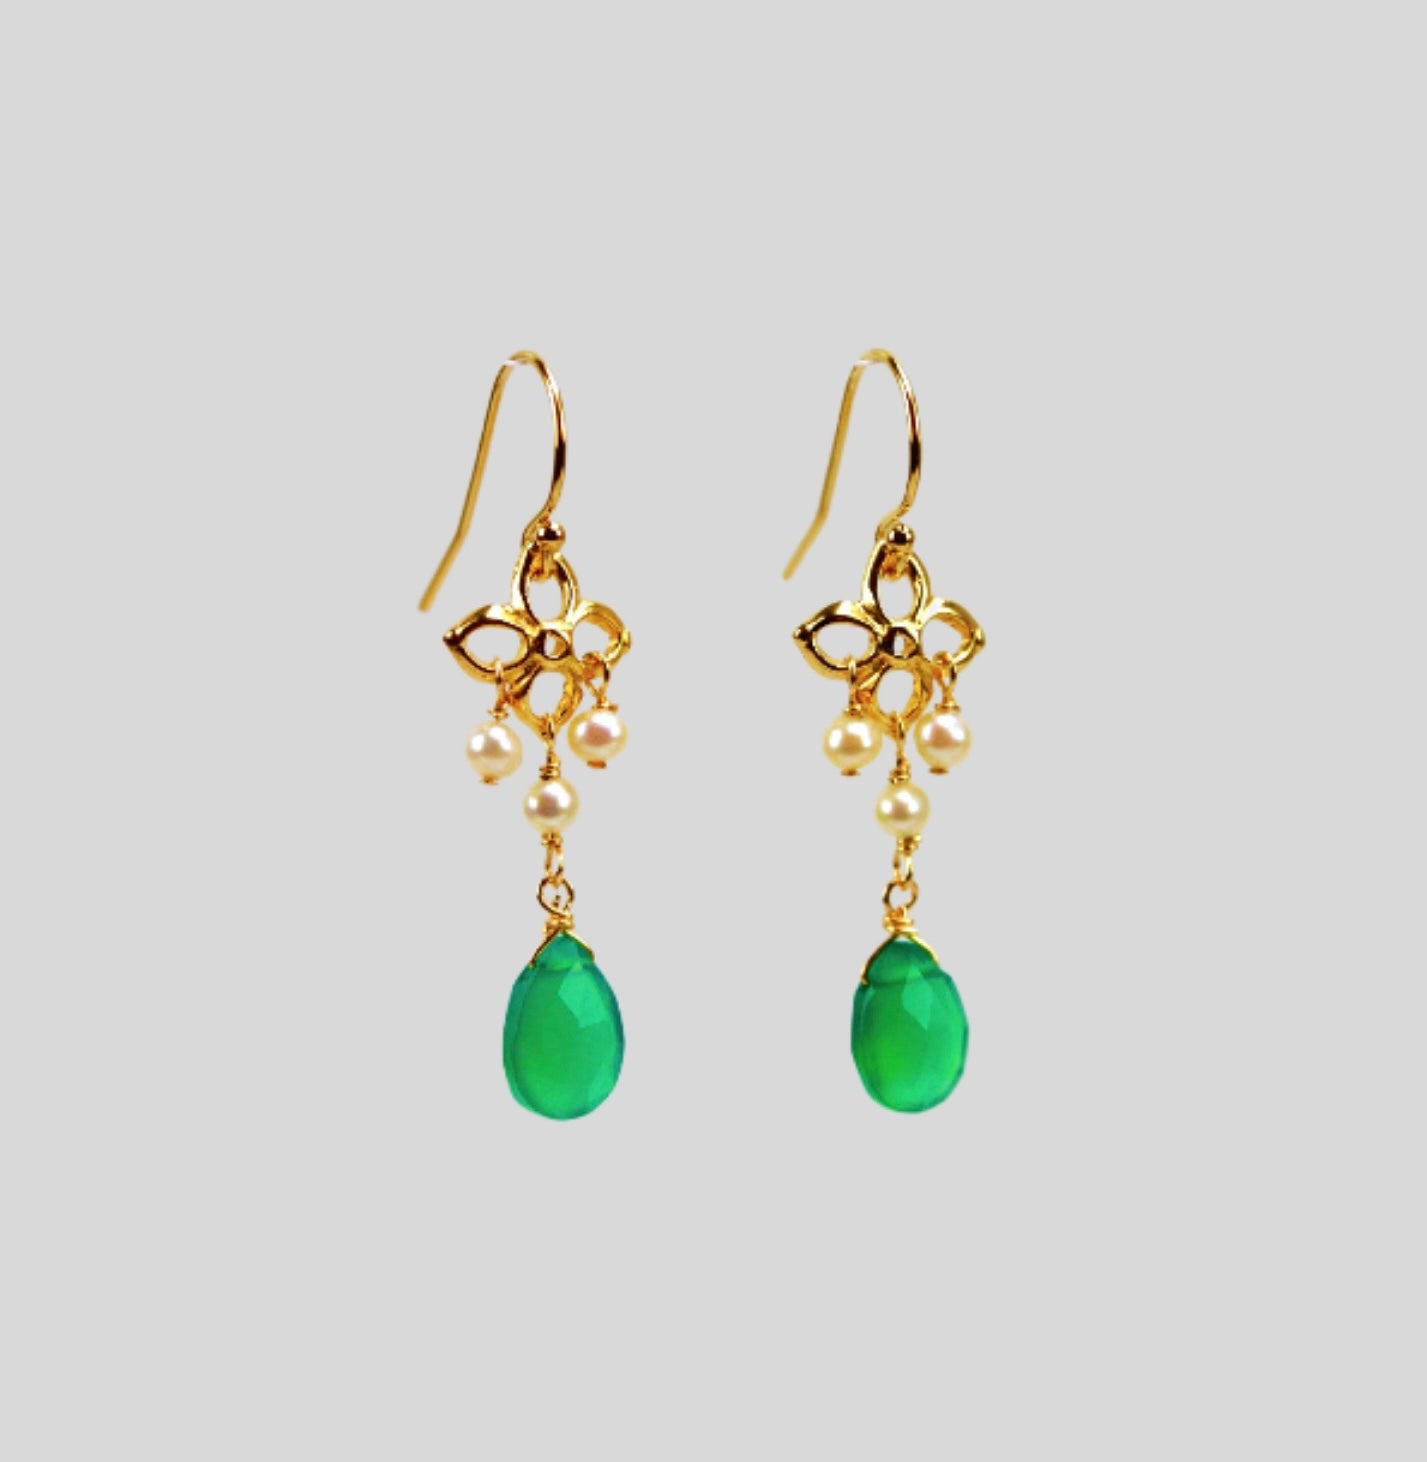 Four Petal Chandelier Earrings with Baby Pearls and Green Onyx